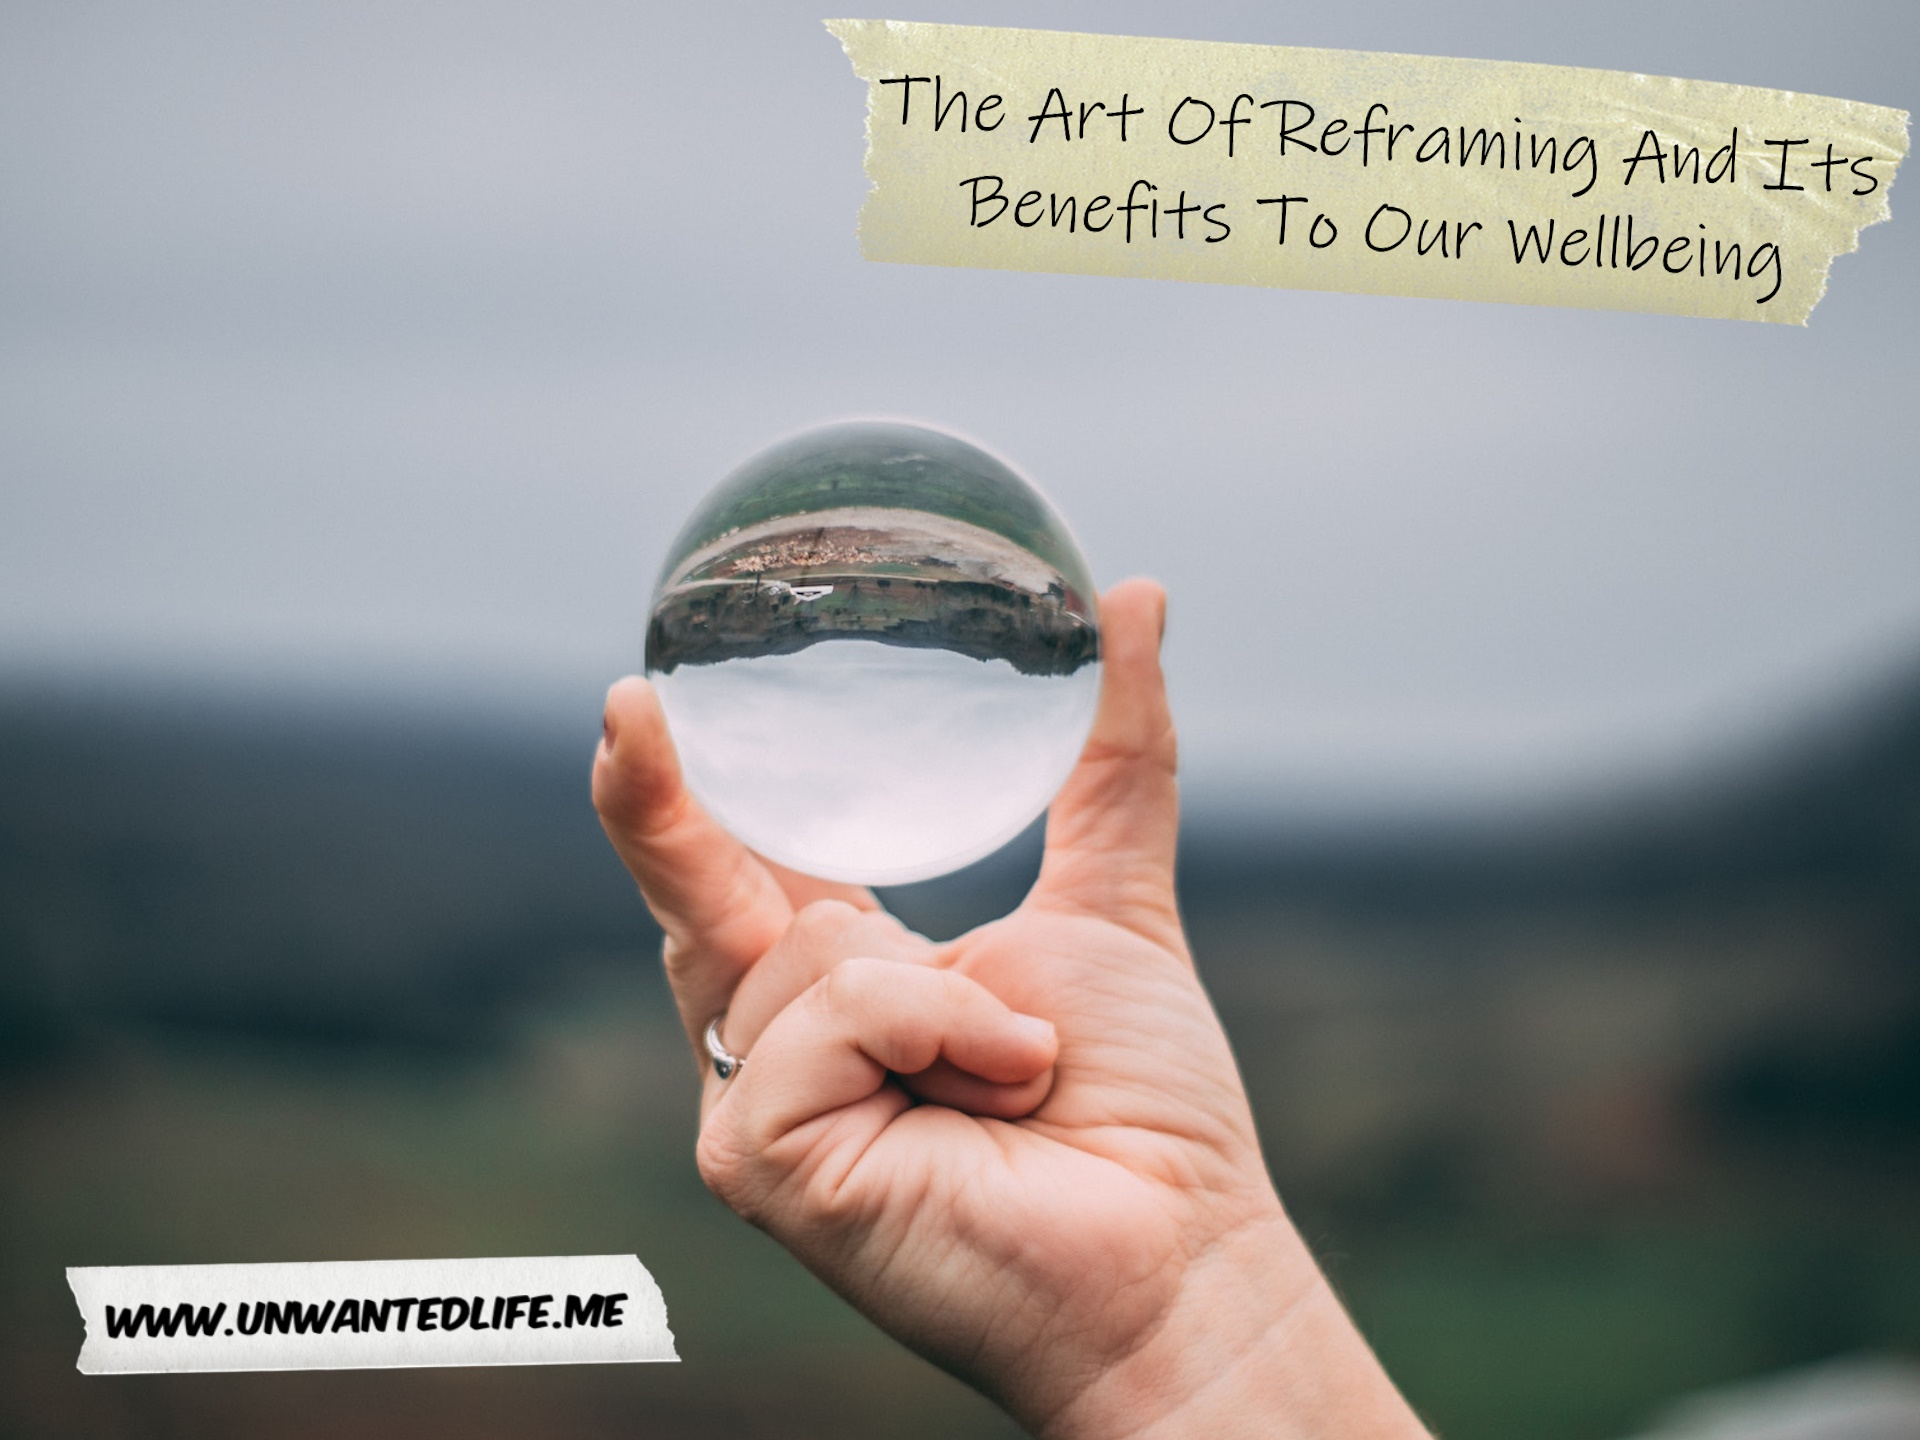 A photo of a White person holding a glass ball that flips the image upside down, granting a different perspective to represent the topic if the article - The Art Of Reframing And Its Benefits To Our Wellbeing